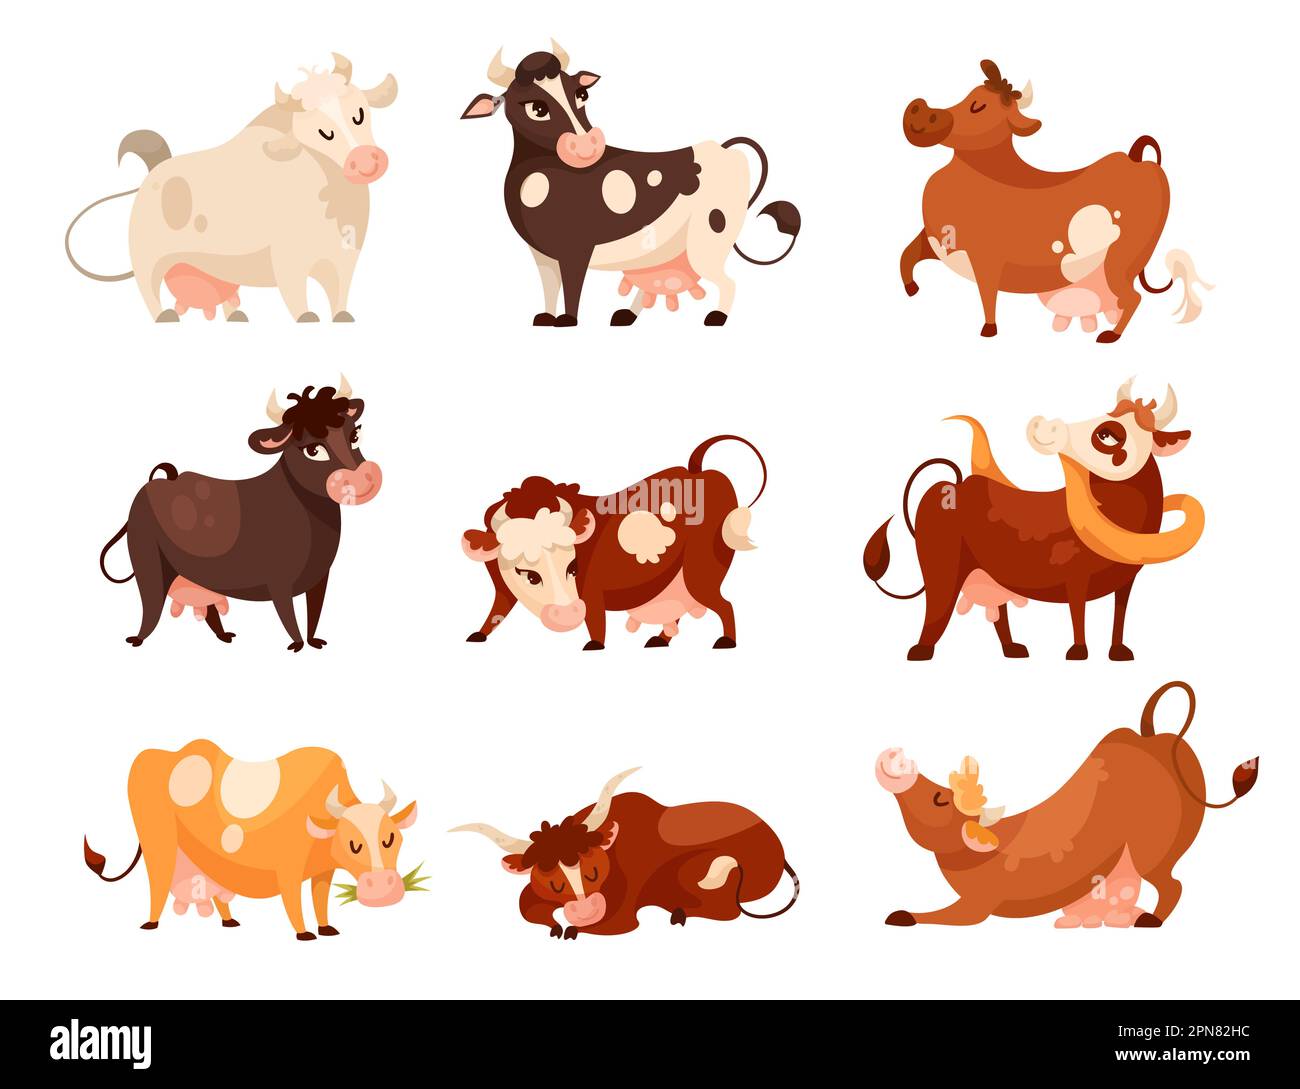 Comic cows of different breeds vector illustrations set Stock Vector